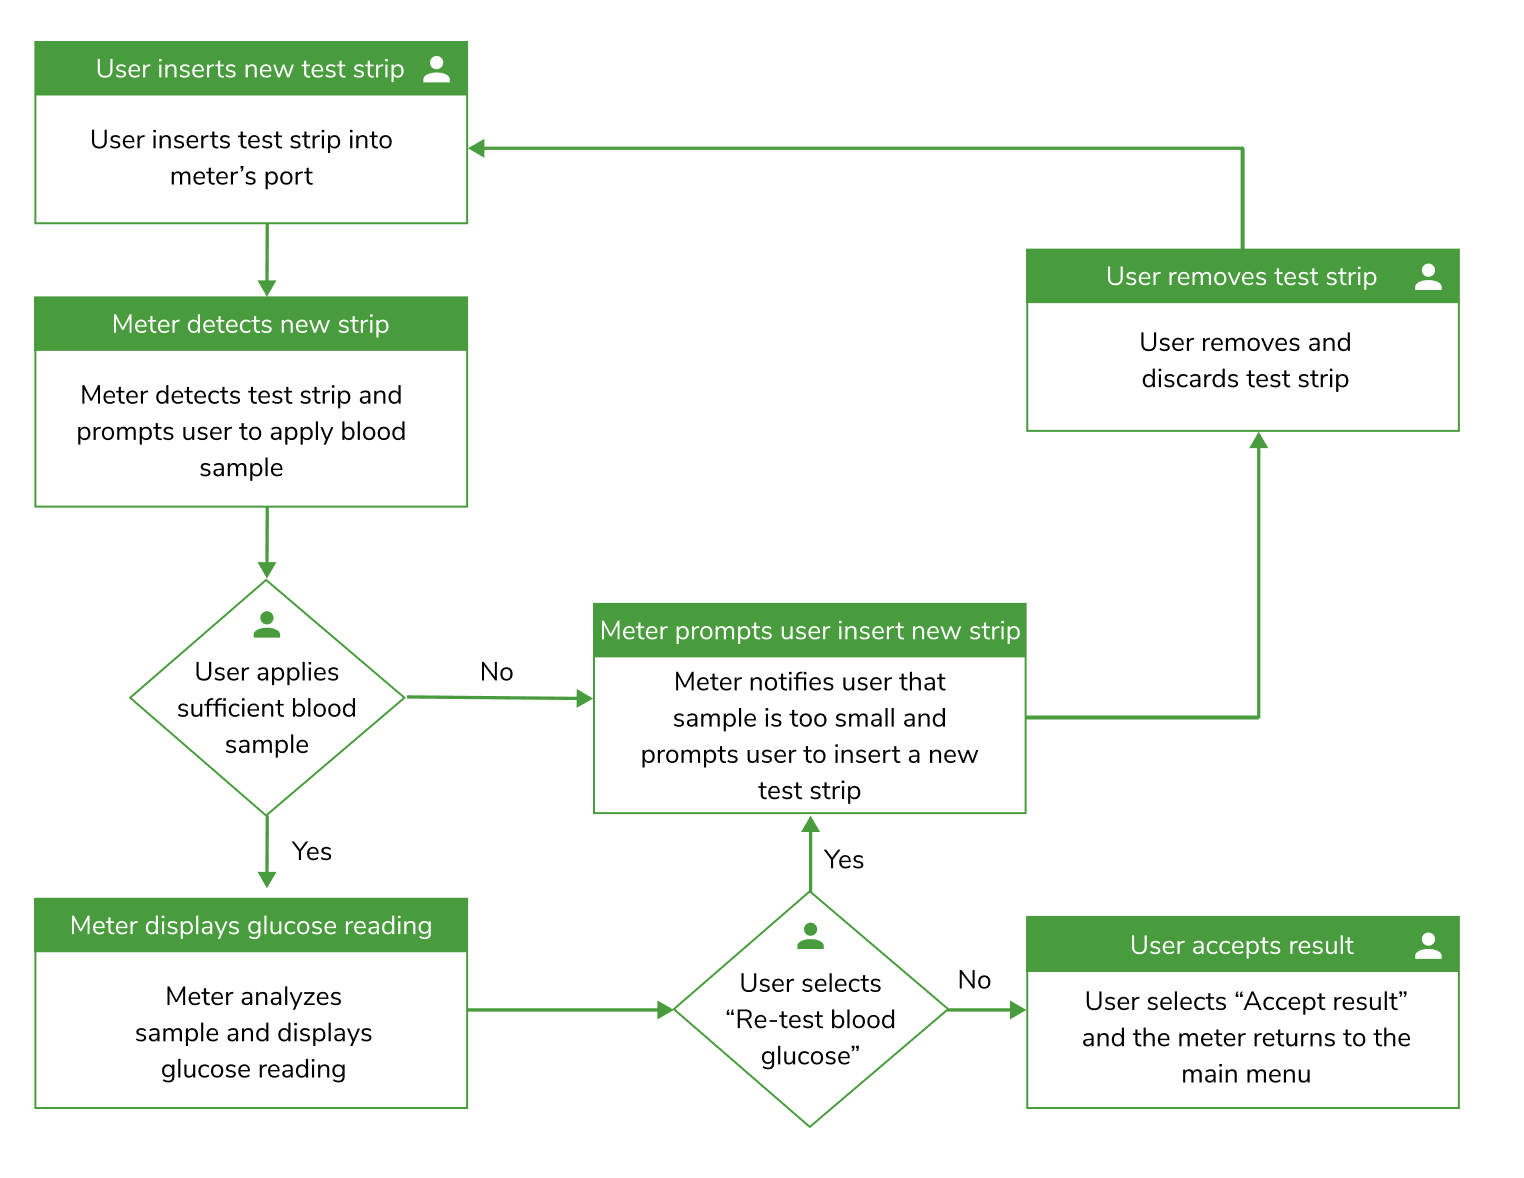 Example of a task analysis flow chart